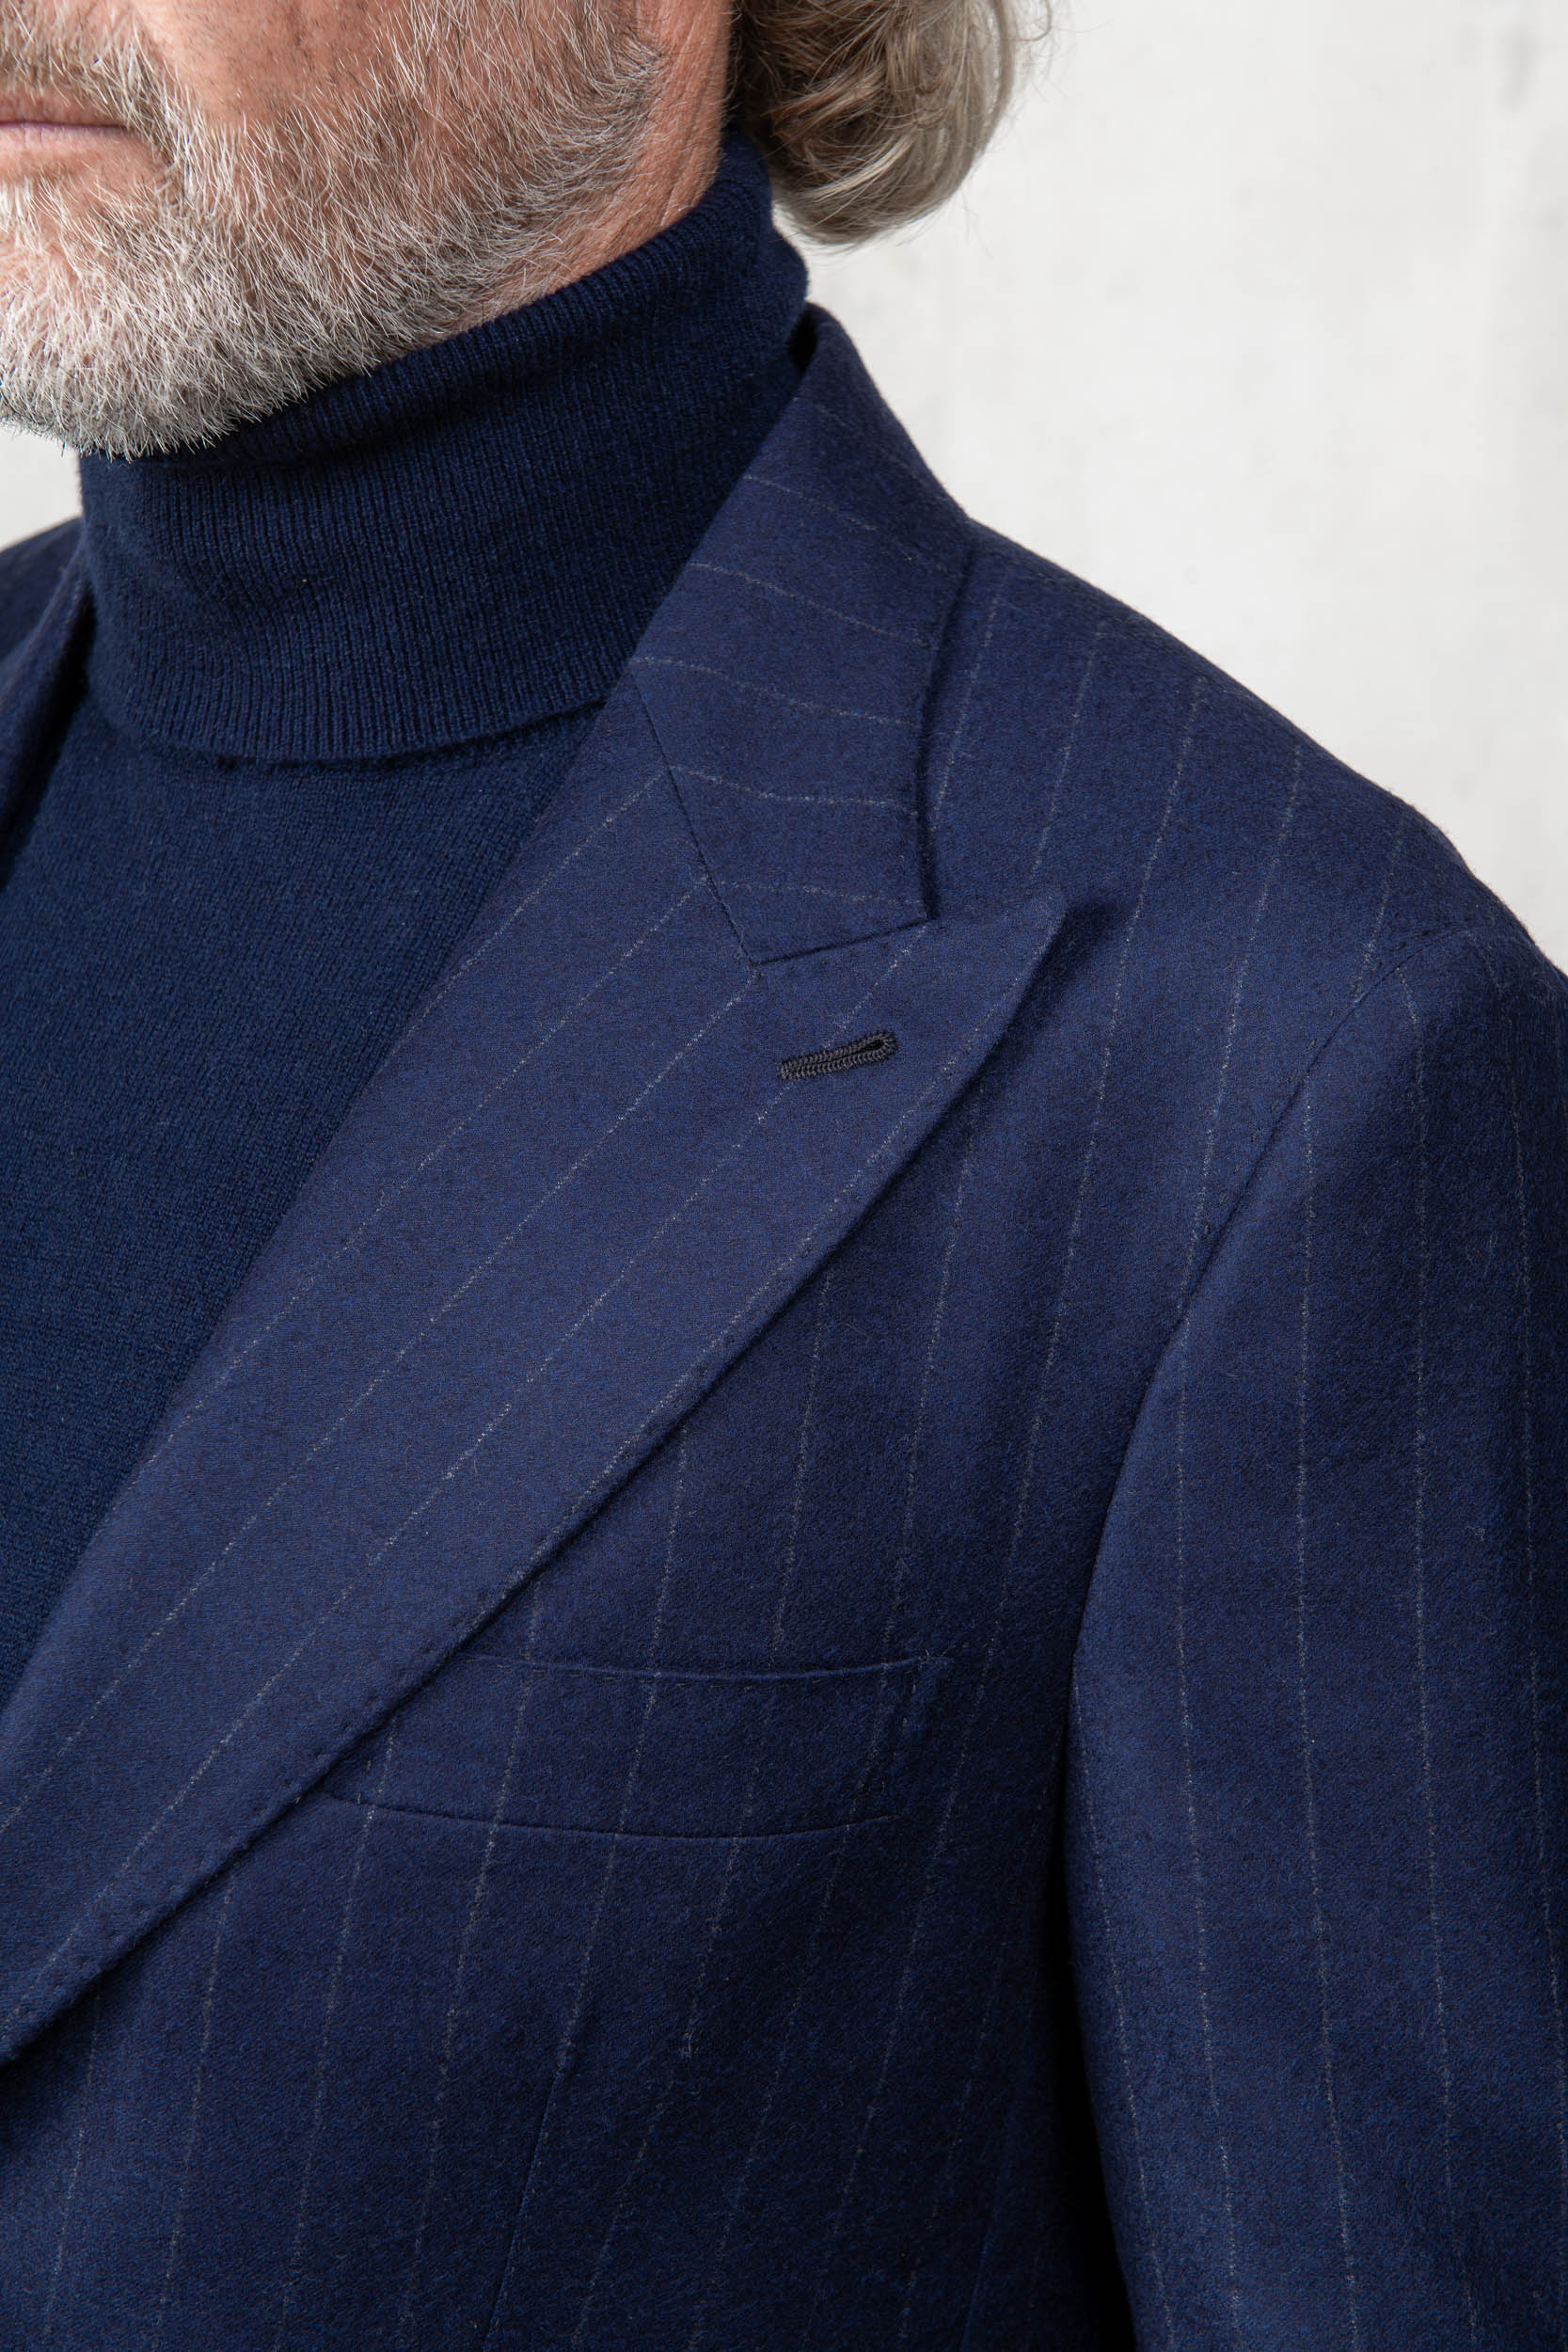 Blue striped flannel suit "Soragna Capsule Collection" - Made in Italy